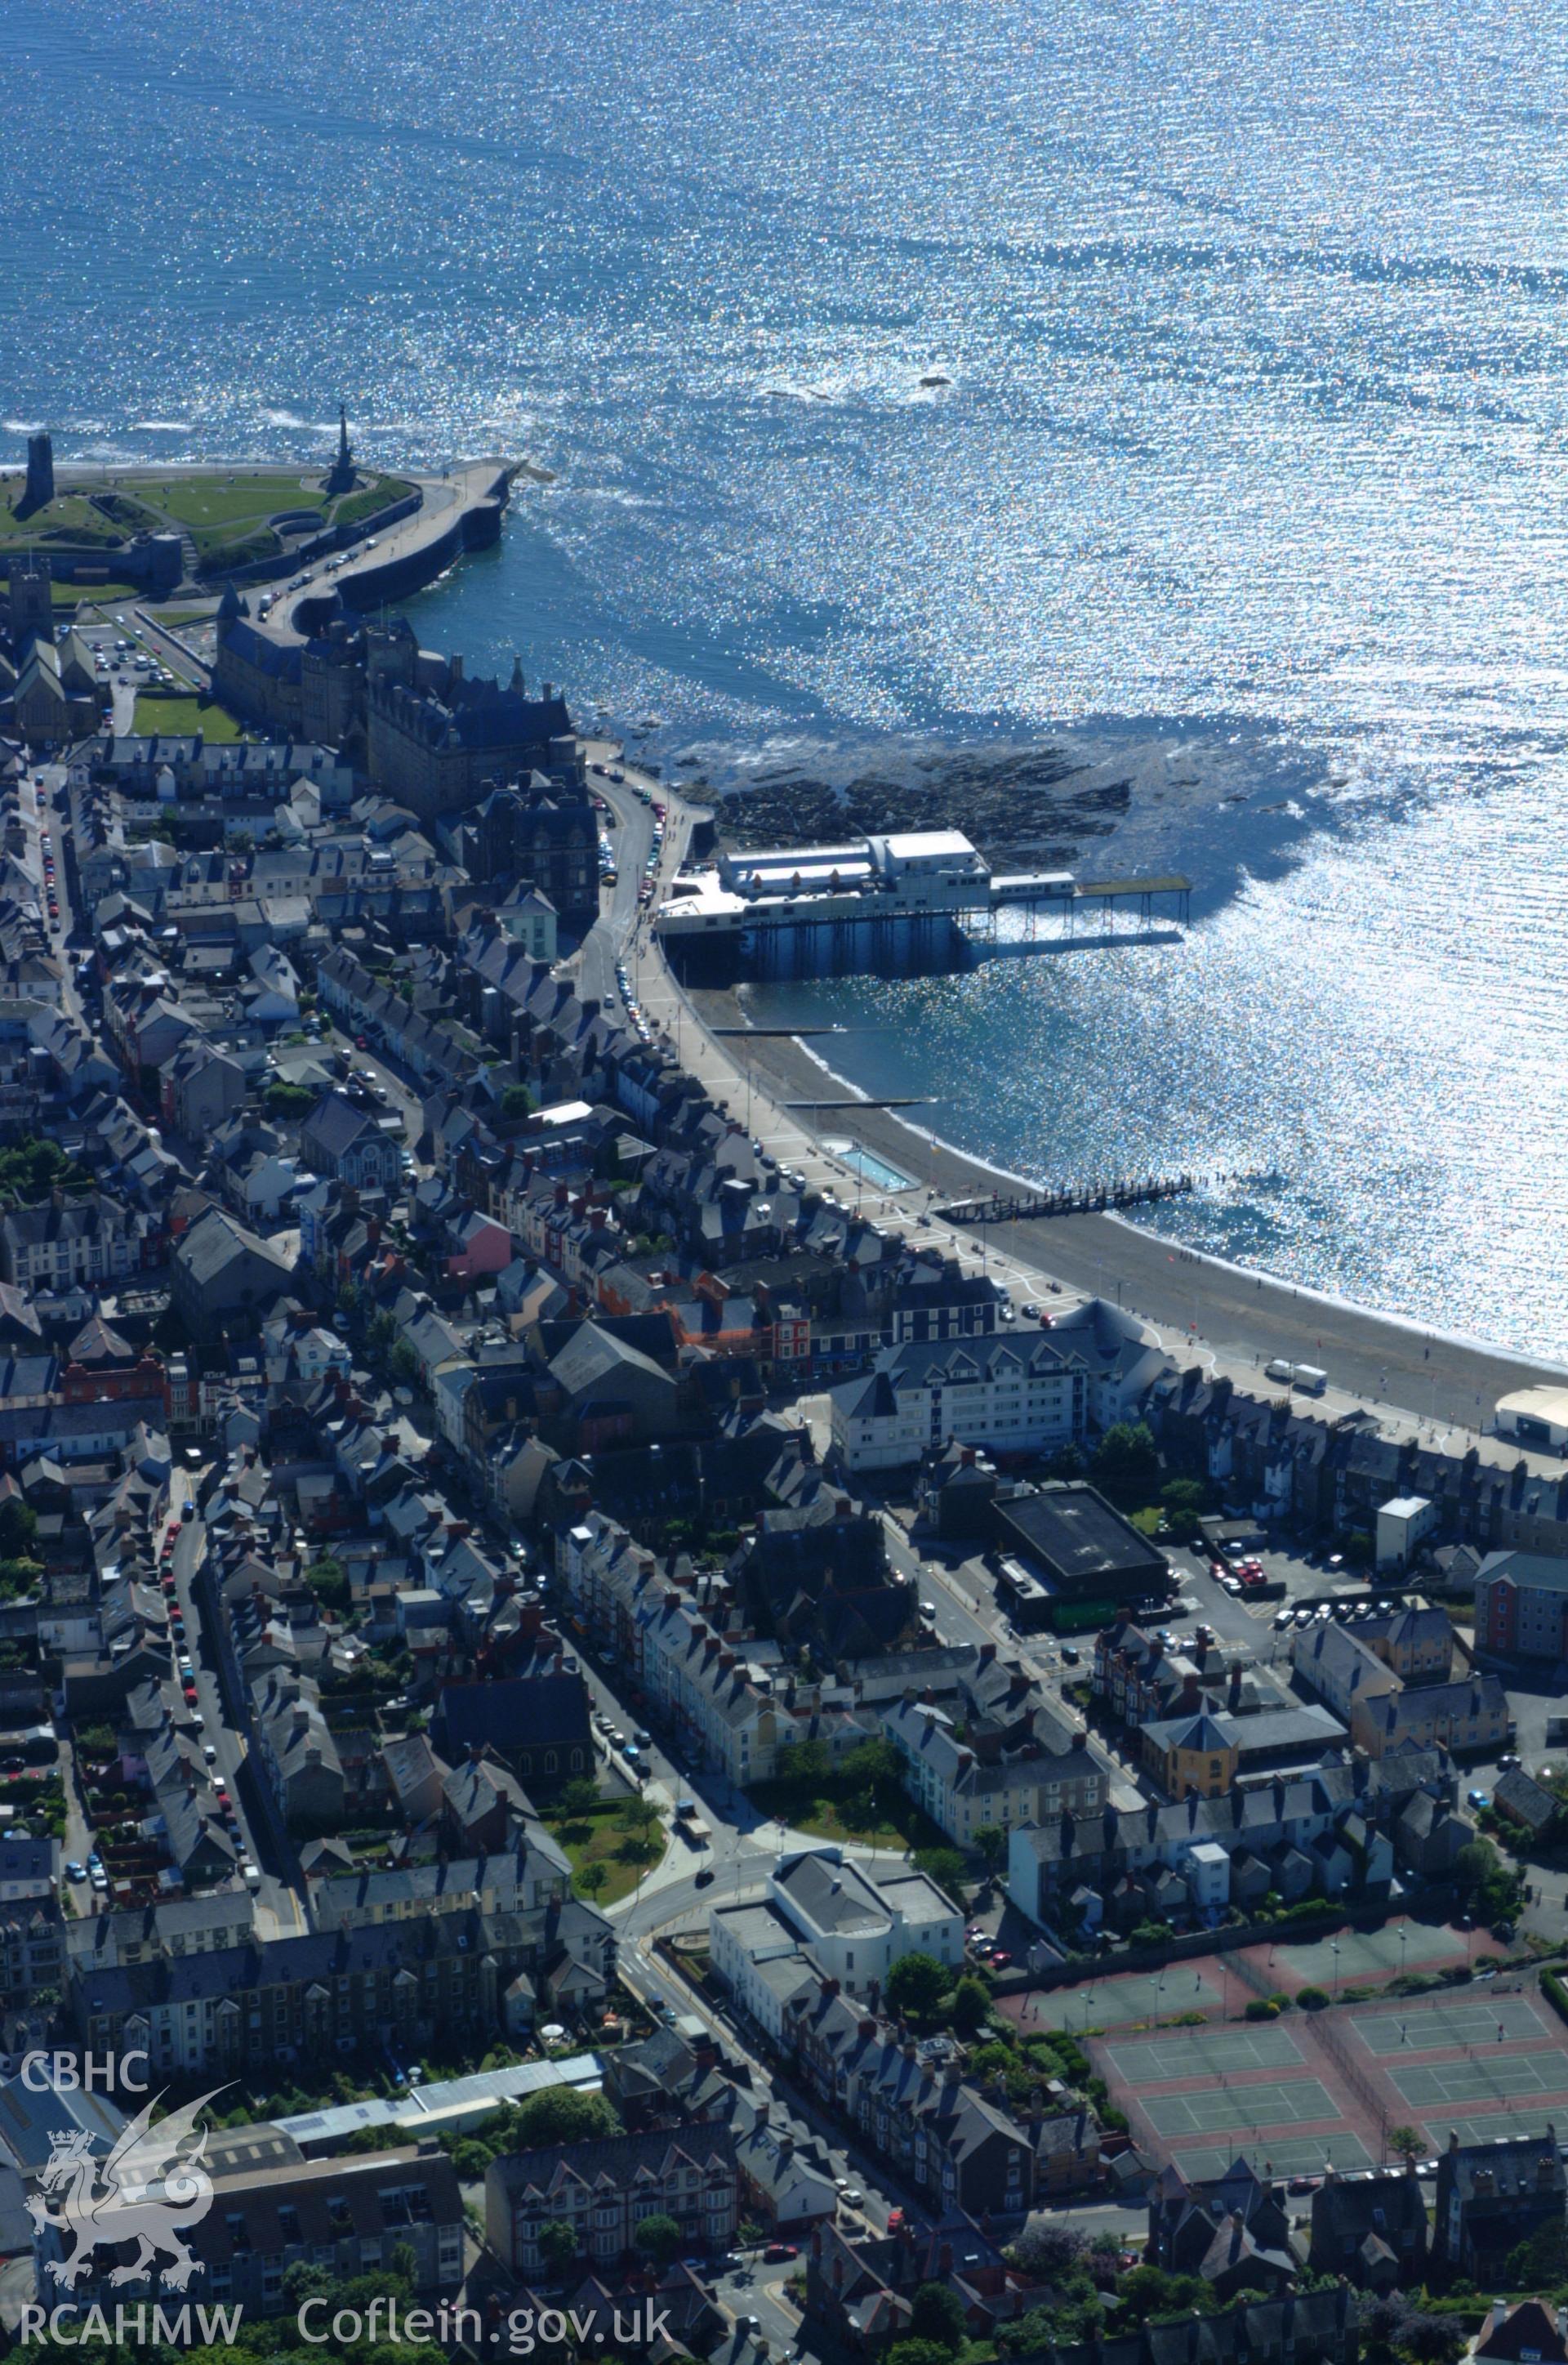 RCAHMW colour oblique aerial photograph of Aberystwyth Pier and Pavilion taken on 14/06/2004 by Toby Driver